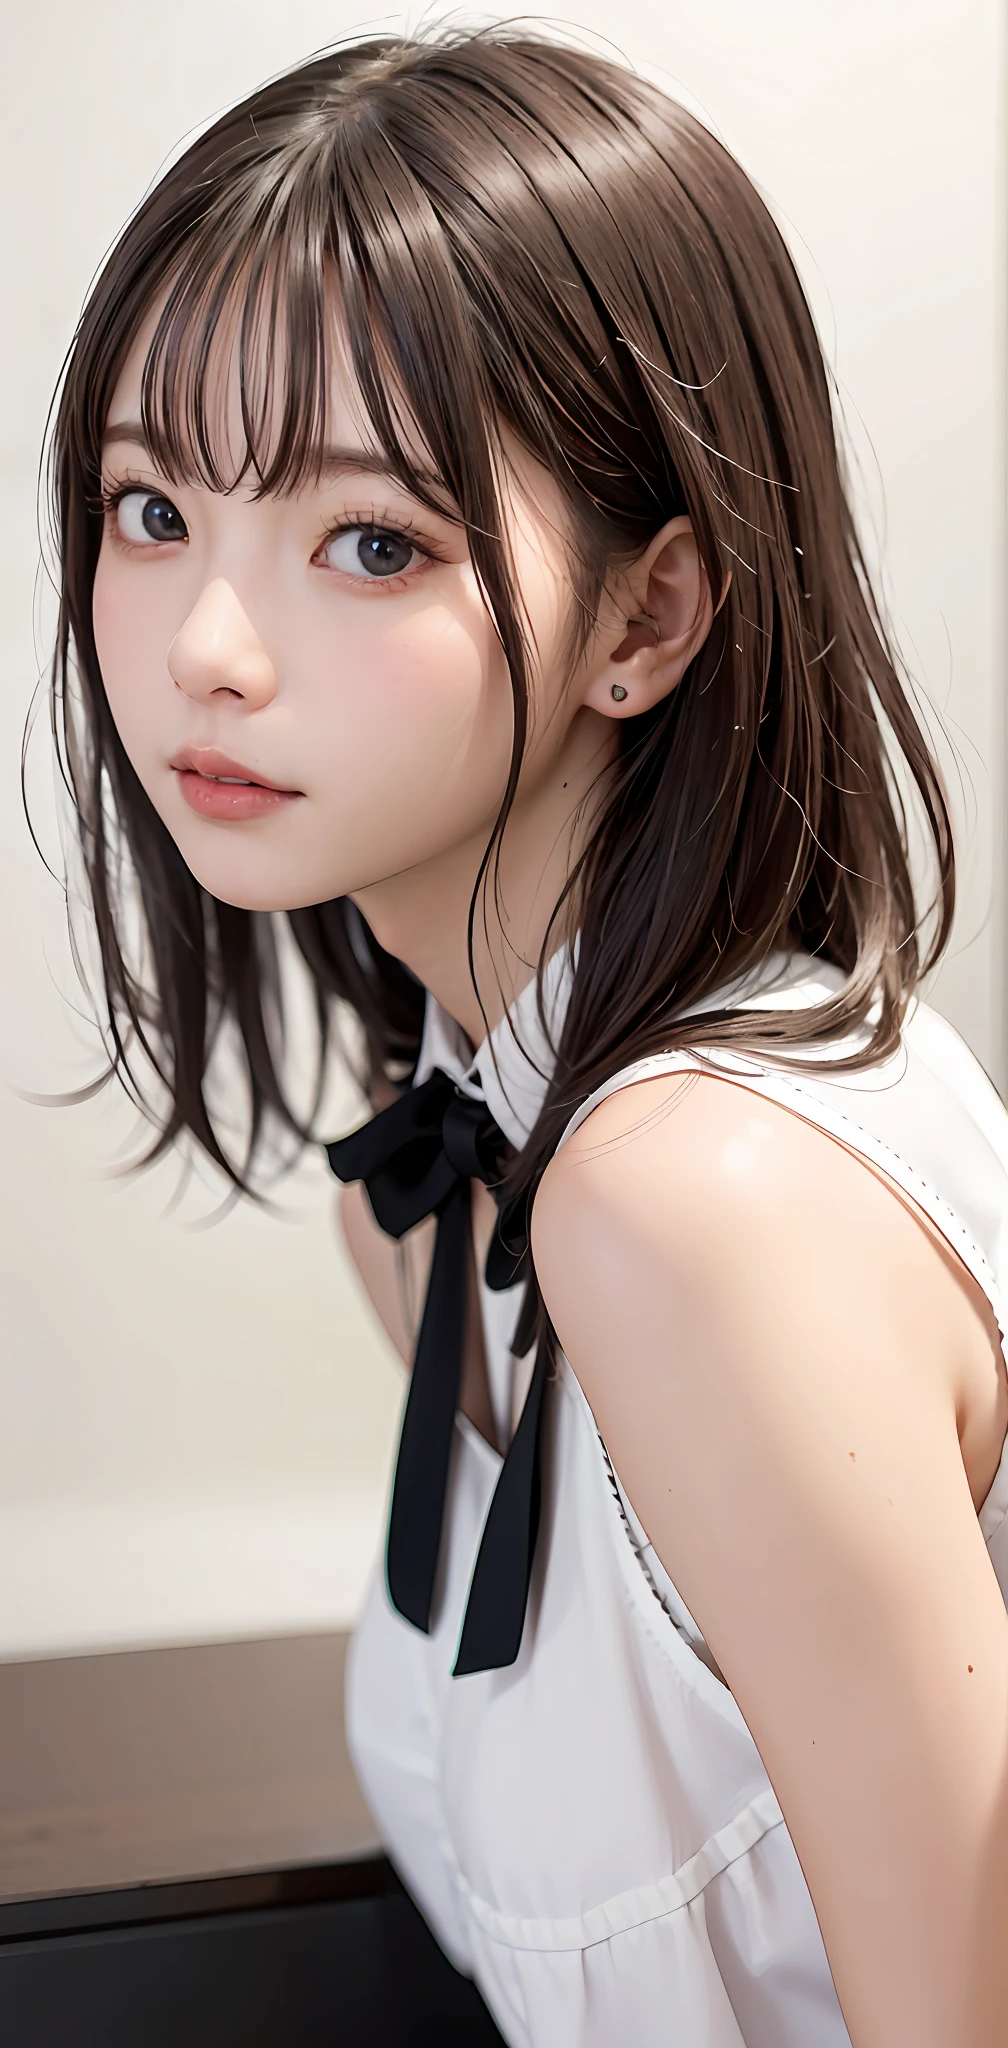 ((Masterpiece、1 beautiful girl、detailed eye、Shorthair with bangs、neck long、Put your ears out))、big eye、Distinct double eyelids、((best quality, ultra-high-resolution)), (Realisticity: 1.4), OriginalPhotographs, 1Girl,Cinema tick writing、japanes、Asian Beauty、Korea person、Super beauty、Beautiful skin、extremely large bosom、A slender、the body is facing forward、(ultra realisitic)、(A high resolution)、(8K)、(Very Details)、(Best Illustration)、(beautifully detailed eyes)、(ultra hyper-detailed)、detailed faces、lookig at viewer、Facing straight ahead、Neat and clean clothes、sleeveless、short-hair、black har、46-point diagonal bangs、Background is really nothing but pure white background、neat atmosphere、